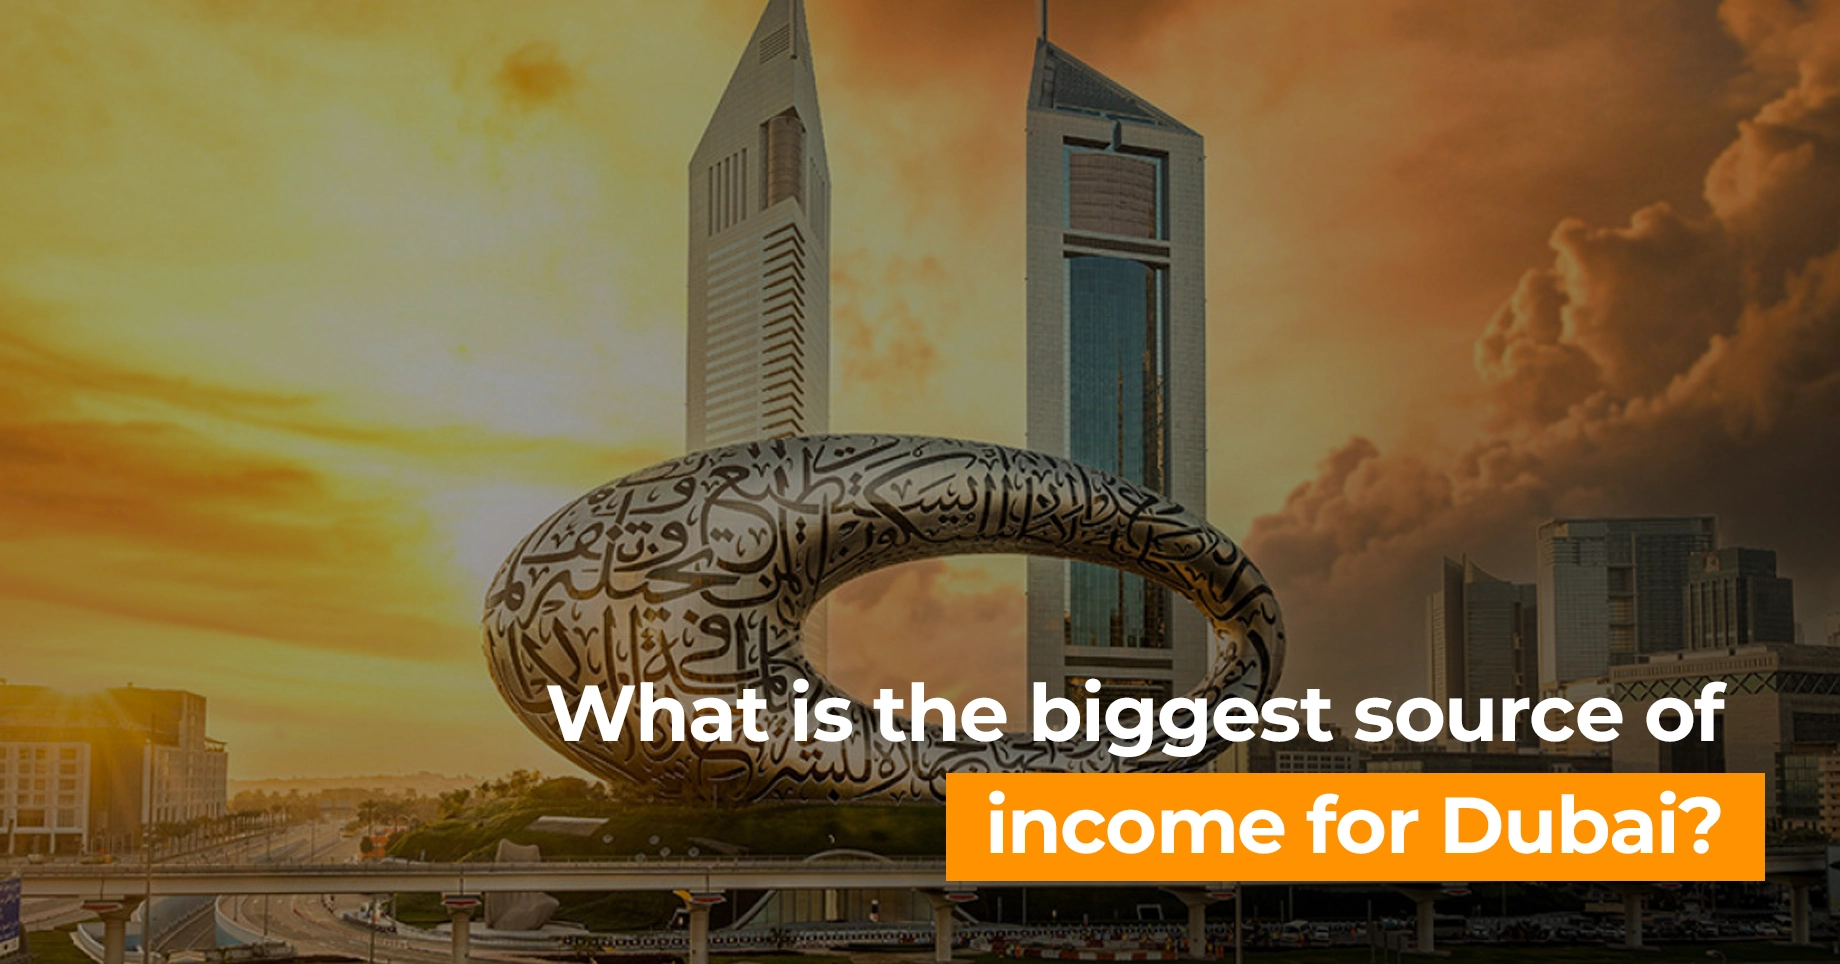 What is the biggest source of income for Dubai